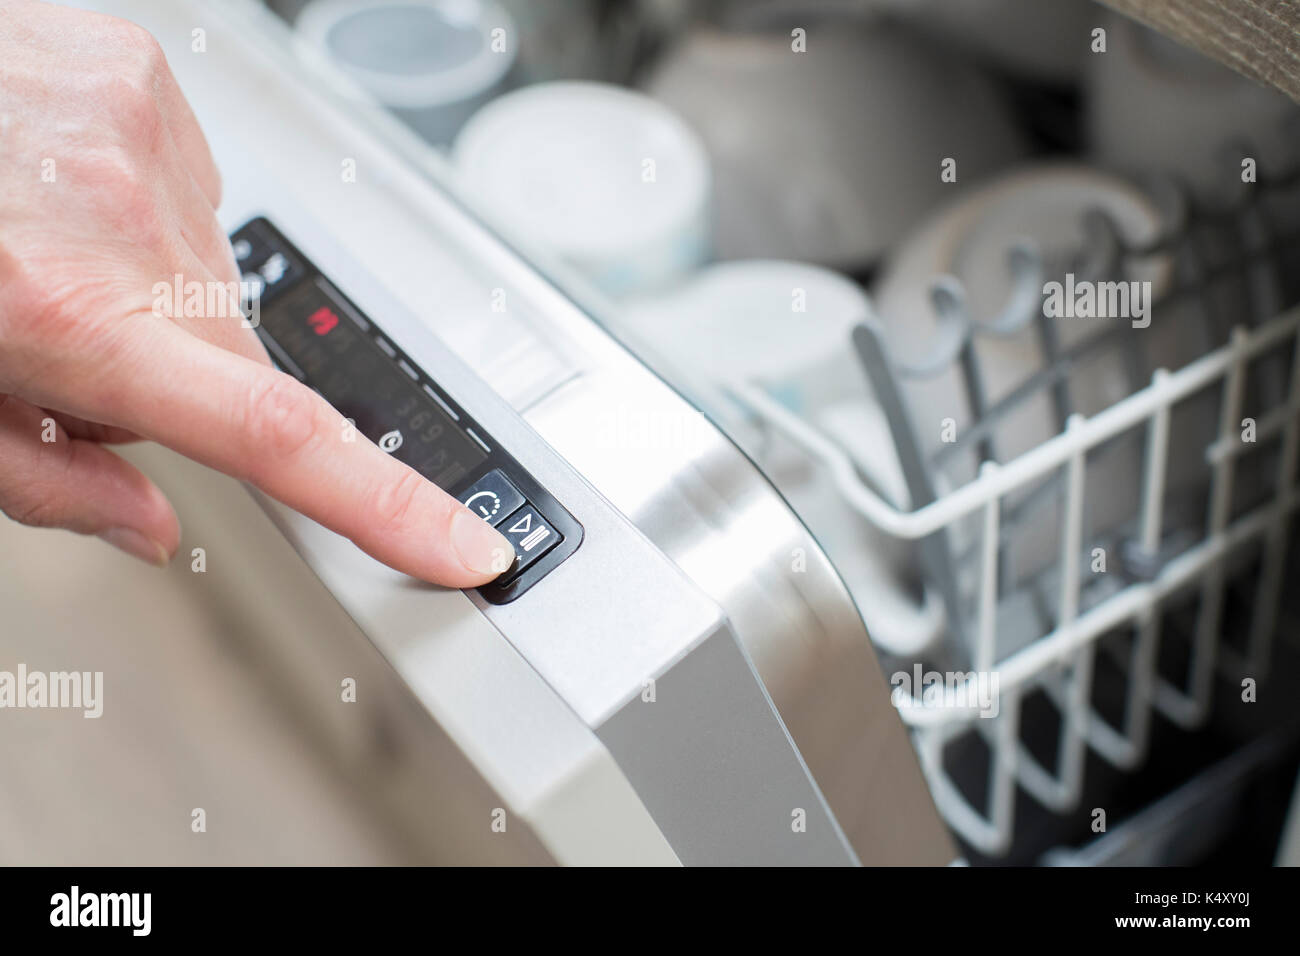 Close Up Of Woman’s Hand Pressing Start Button On Dishwasher Stock Photo